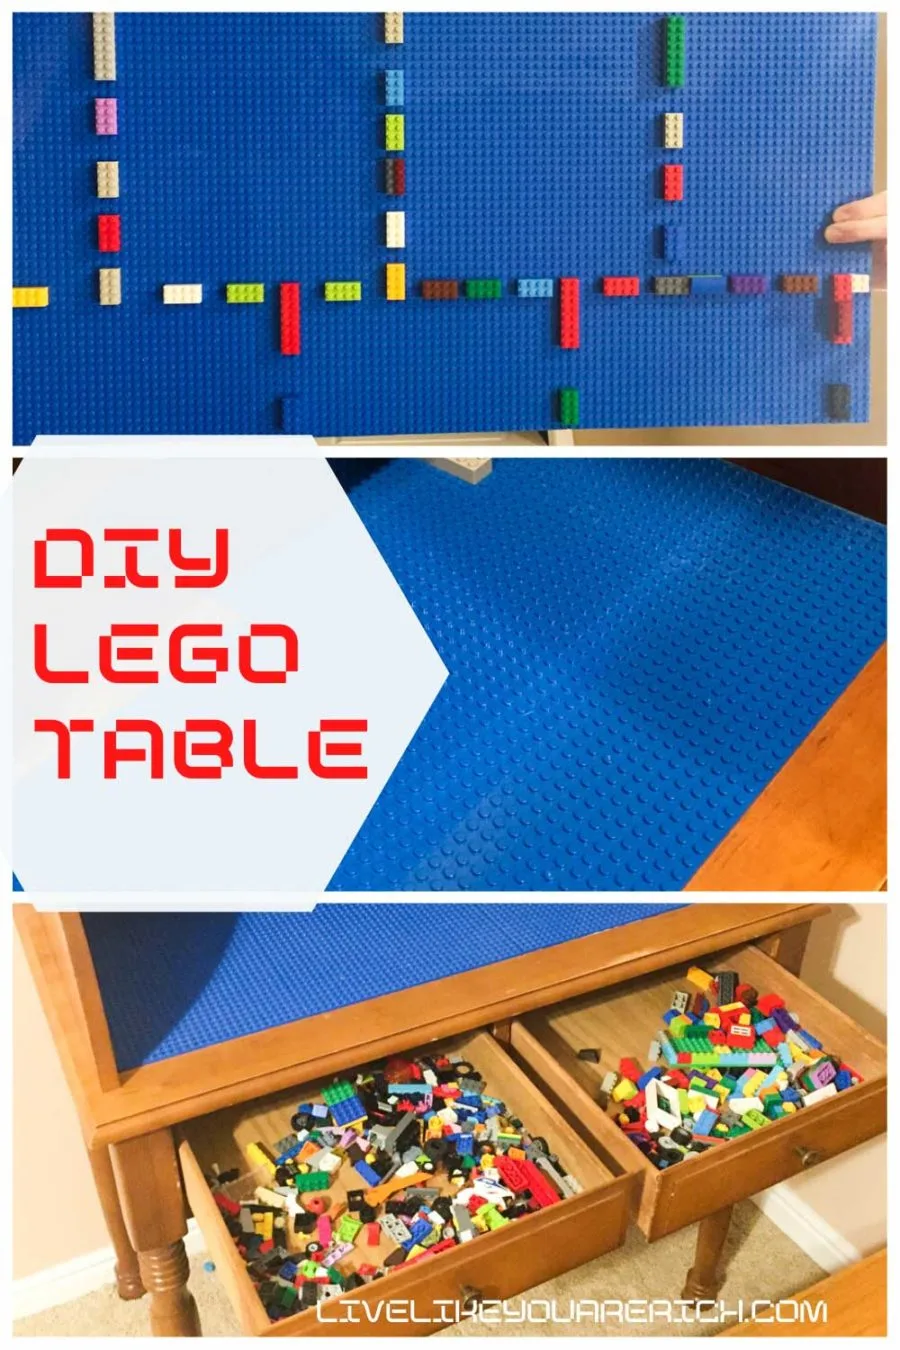 I wanted to make a DIY Lego Desk or table for my son’s legos. I got a roll-top desk for $20.00 on a local classified ad site. Together, with a friend, we built a customized DIY lego roll top desk. The kids have absolutely love it.  #diy #legodesk #diyproject #legostand